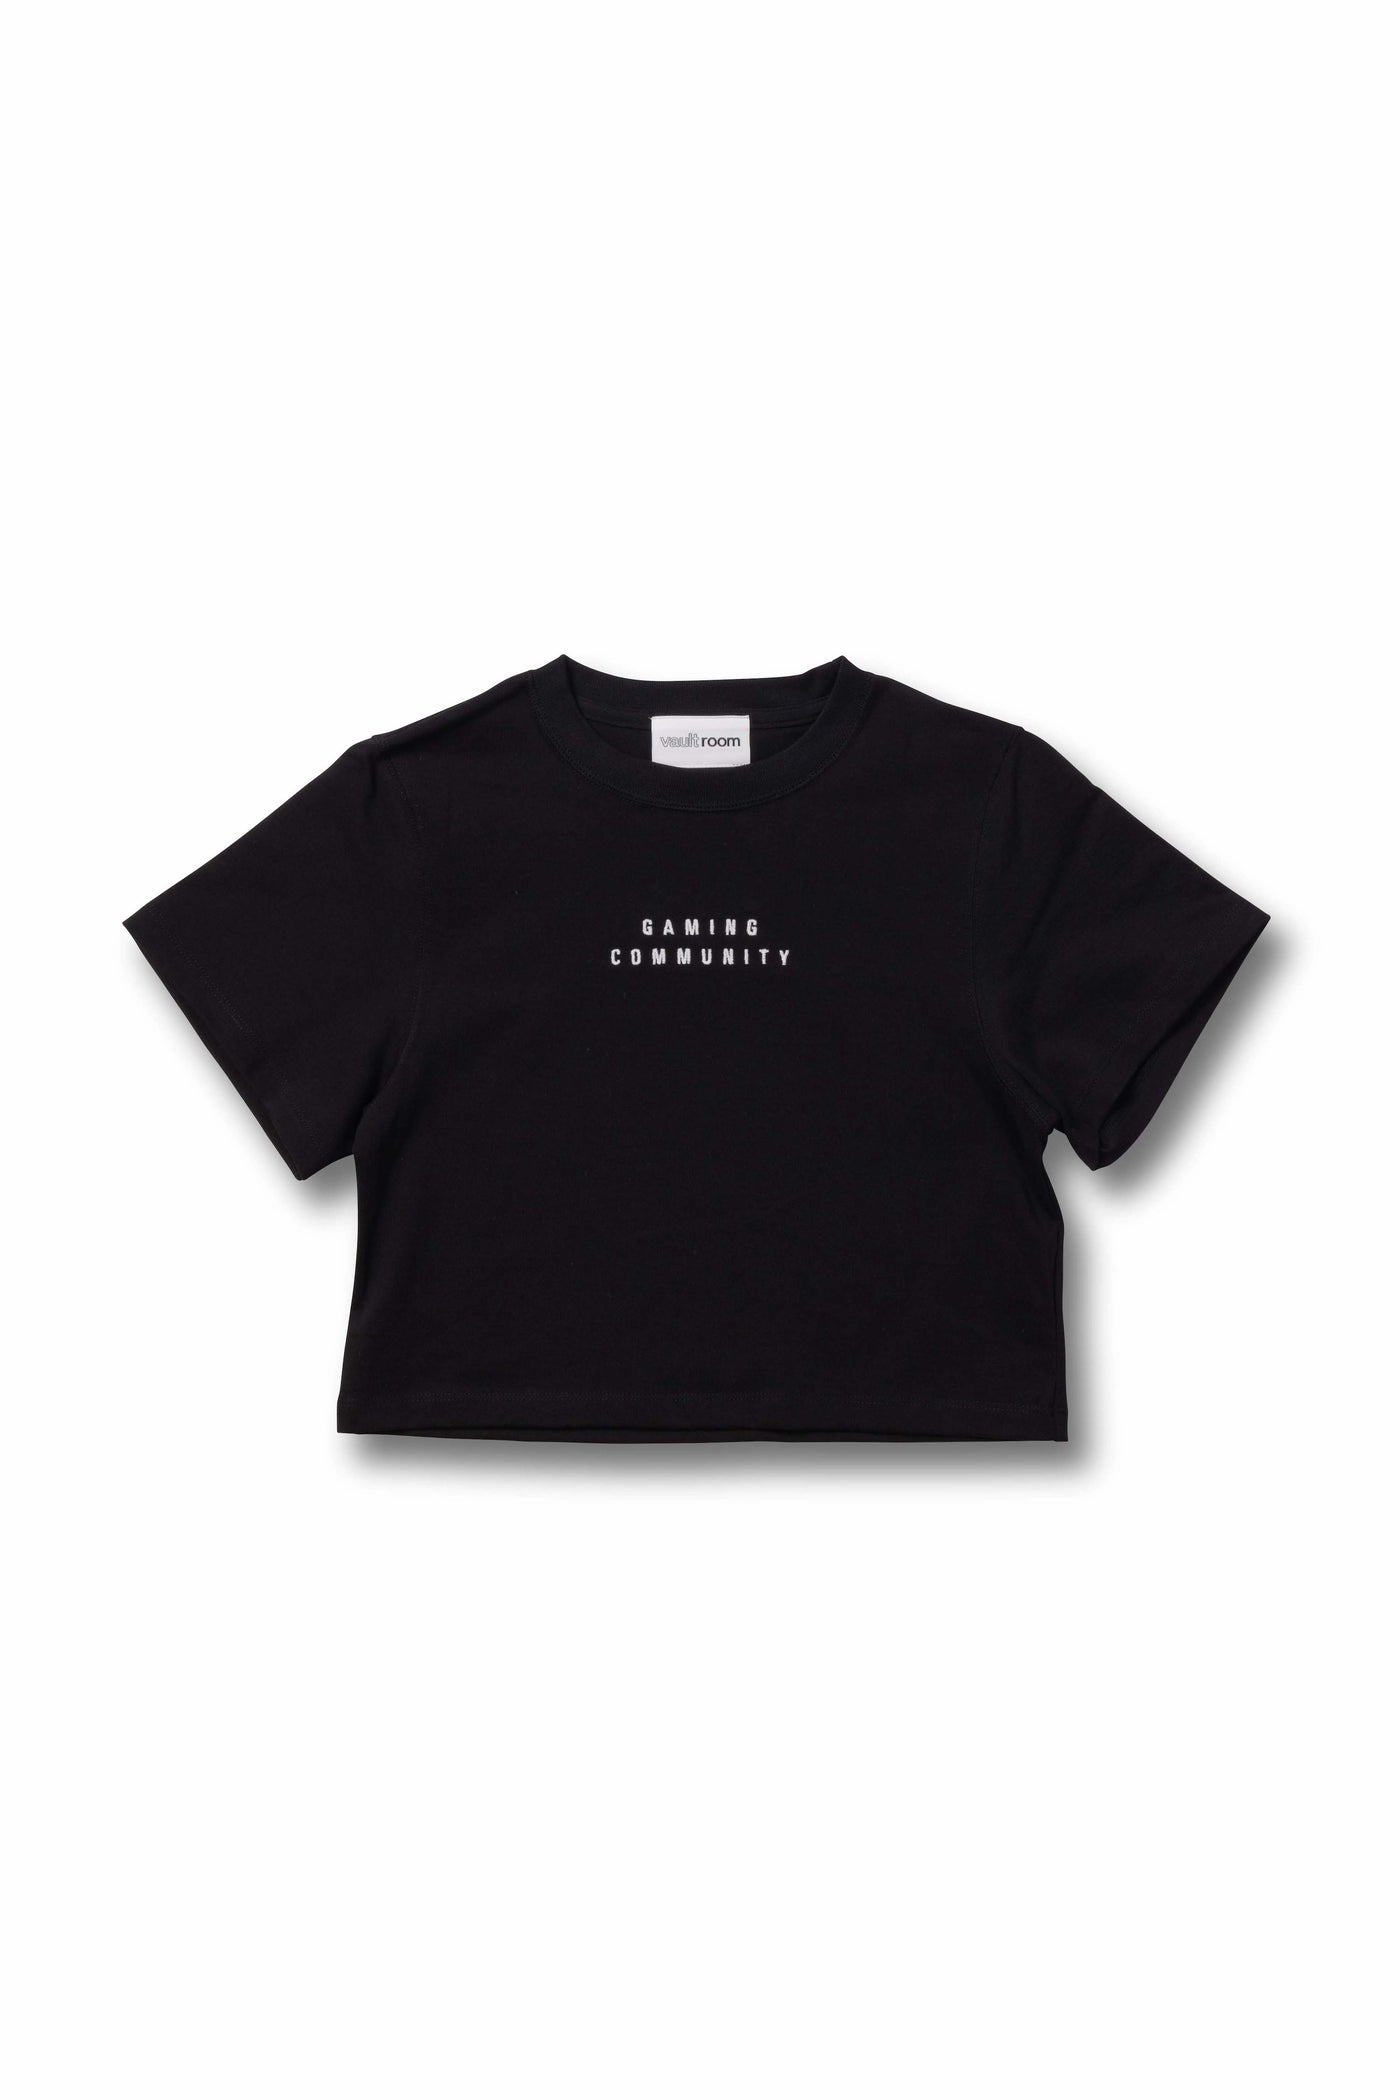 GAMING COMMUNITY MINI CROPPED TEE - Tシャツ/カットソー(半袖/袖なし)